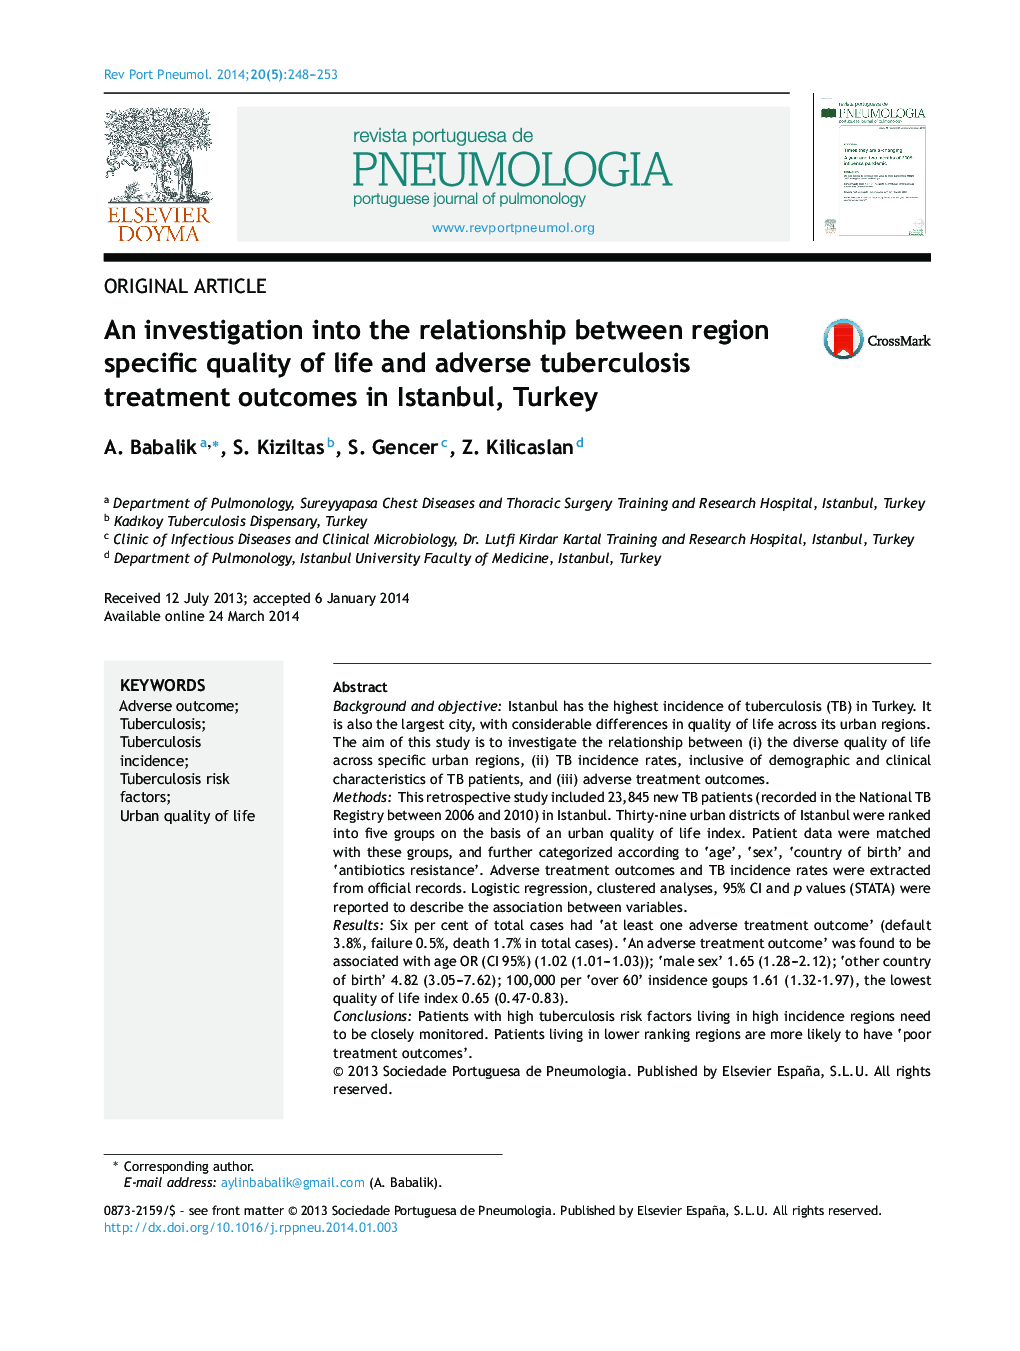 An investigation into the relationship between region specific quality of life and adverse tuberculosis treatment outcomes in Istanbul, Turkey